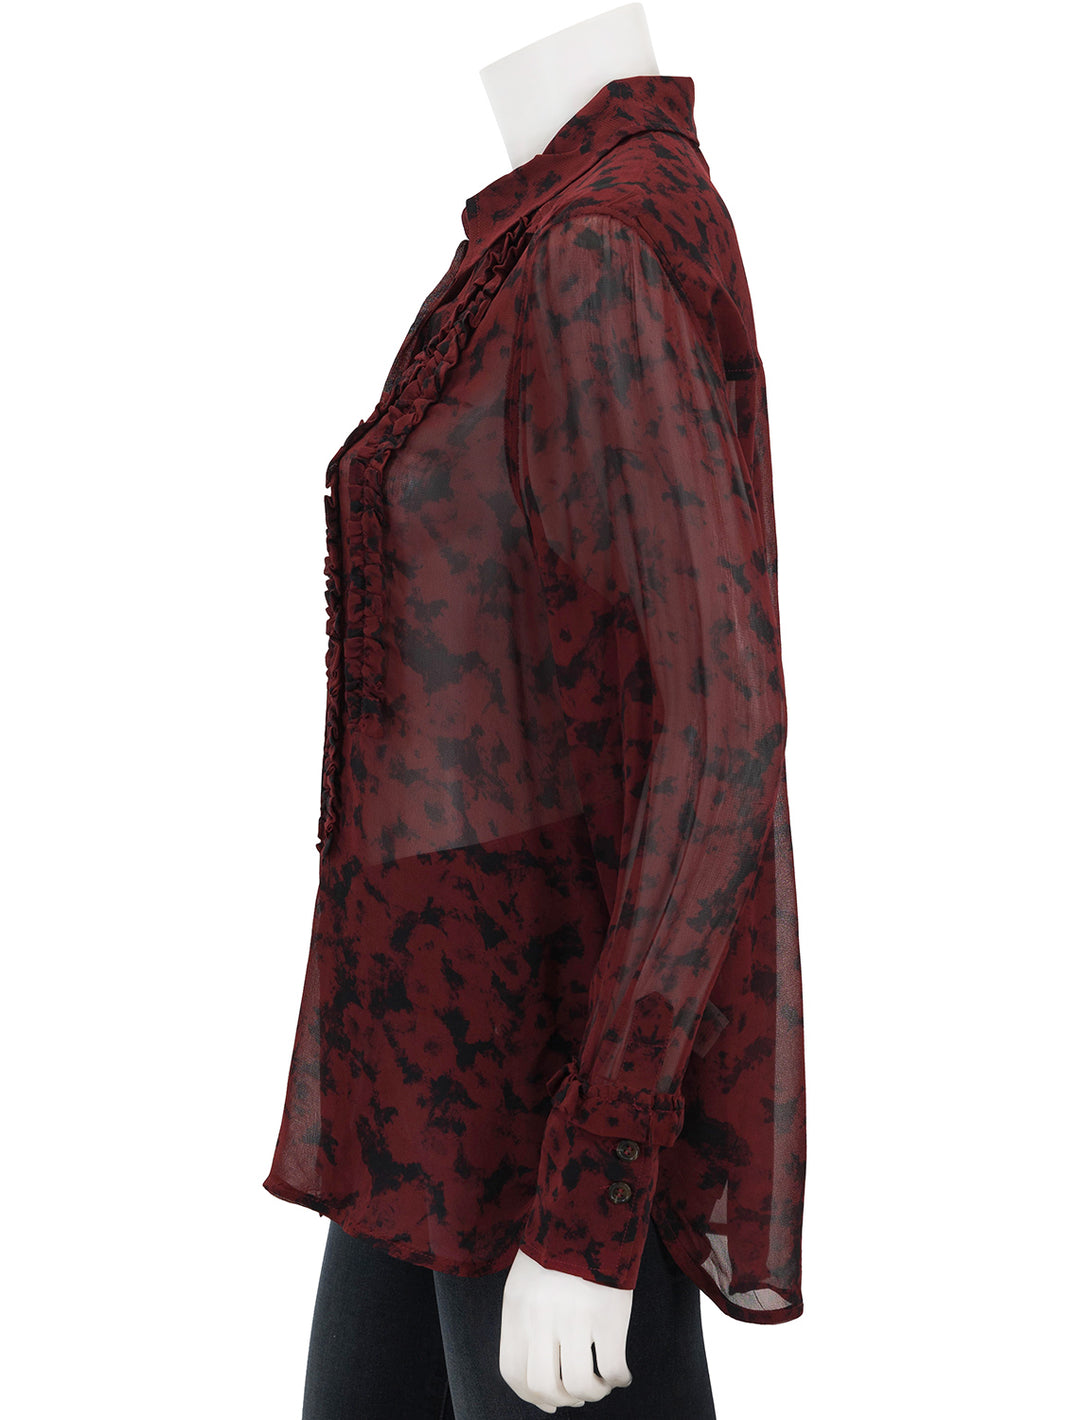 Side view of GANNI's georgette ruffle shirt in syrah.